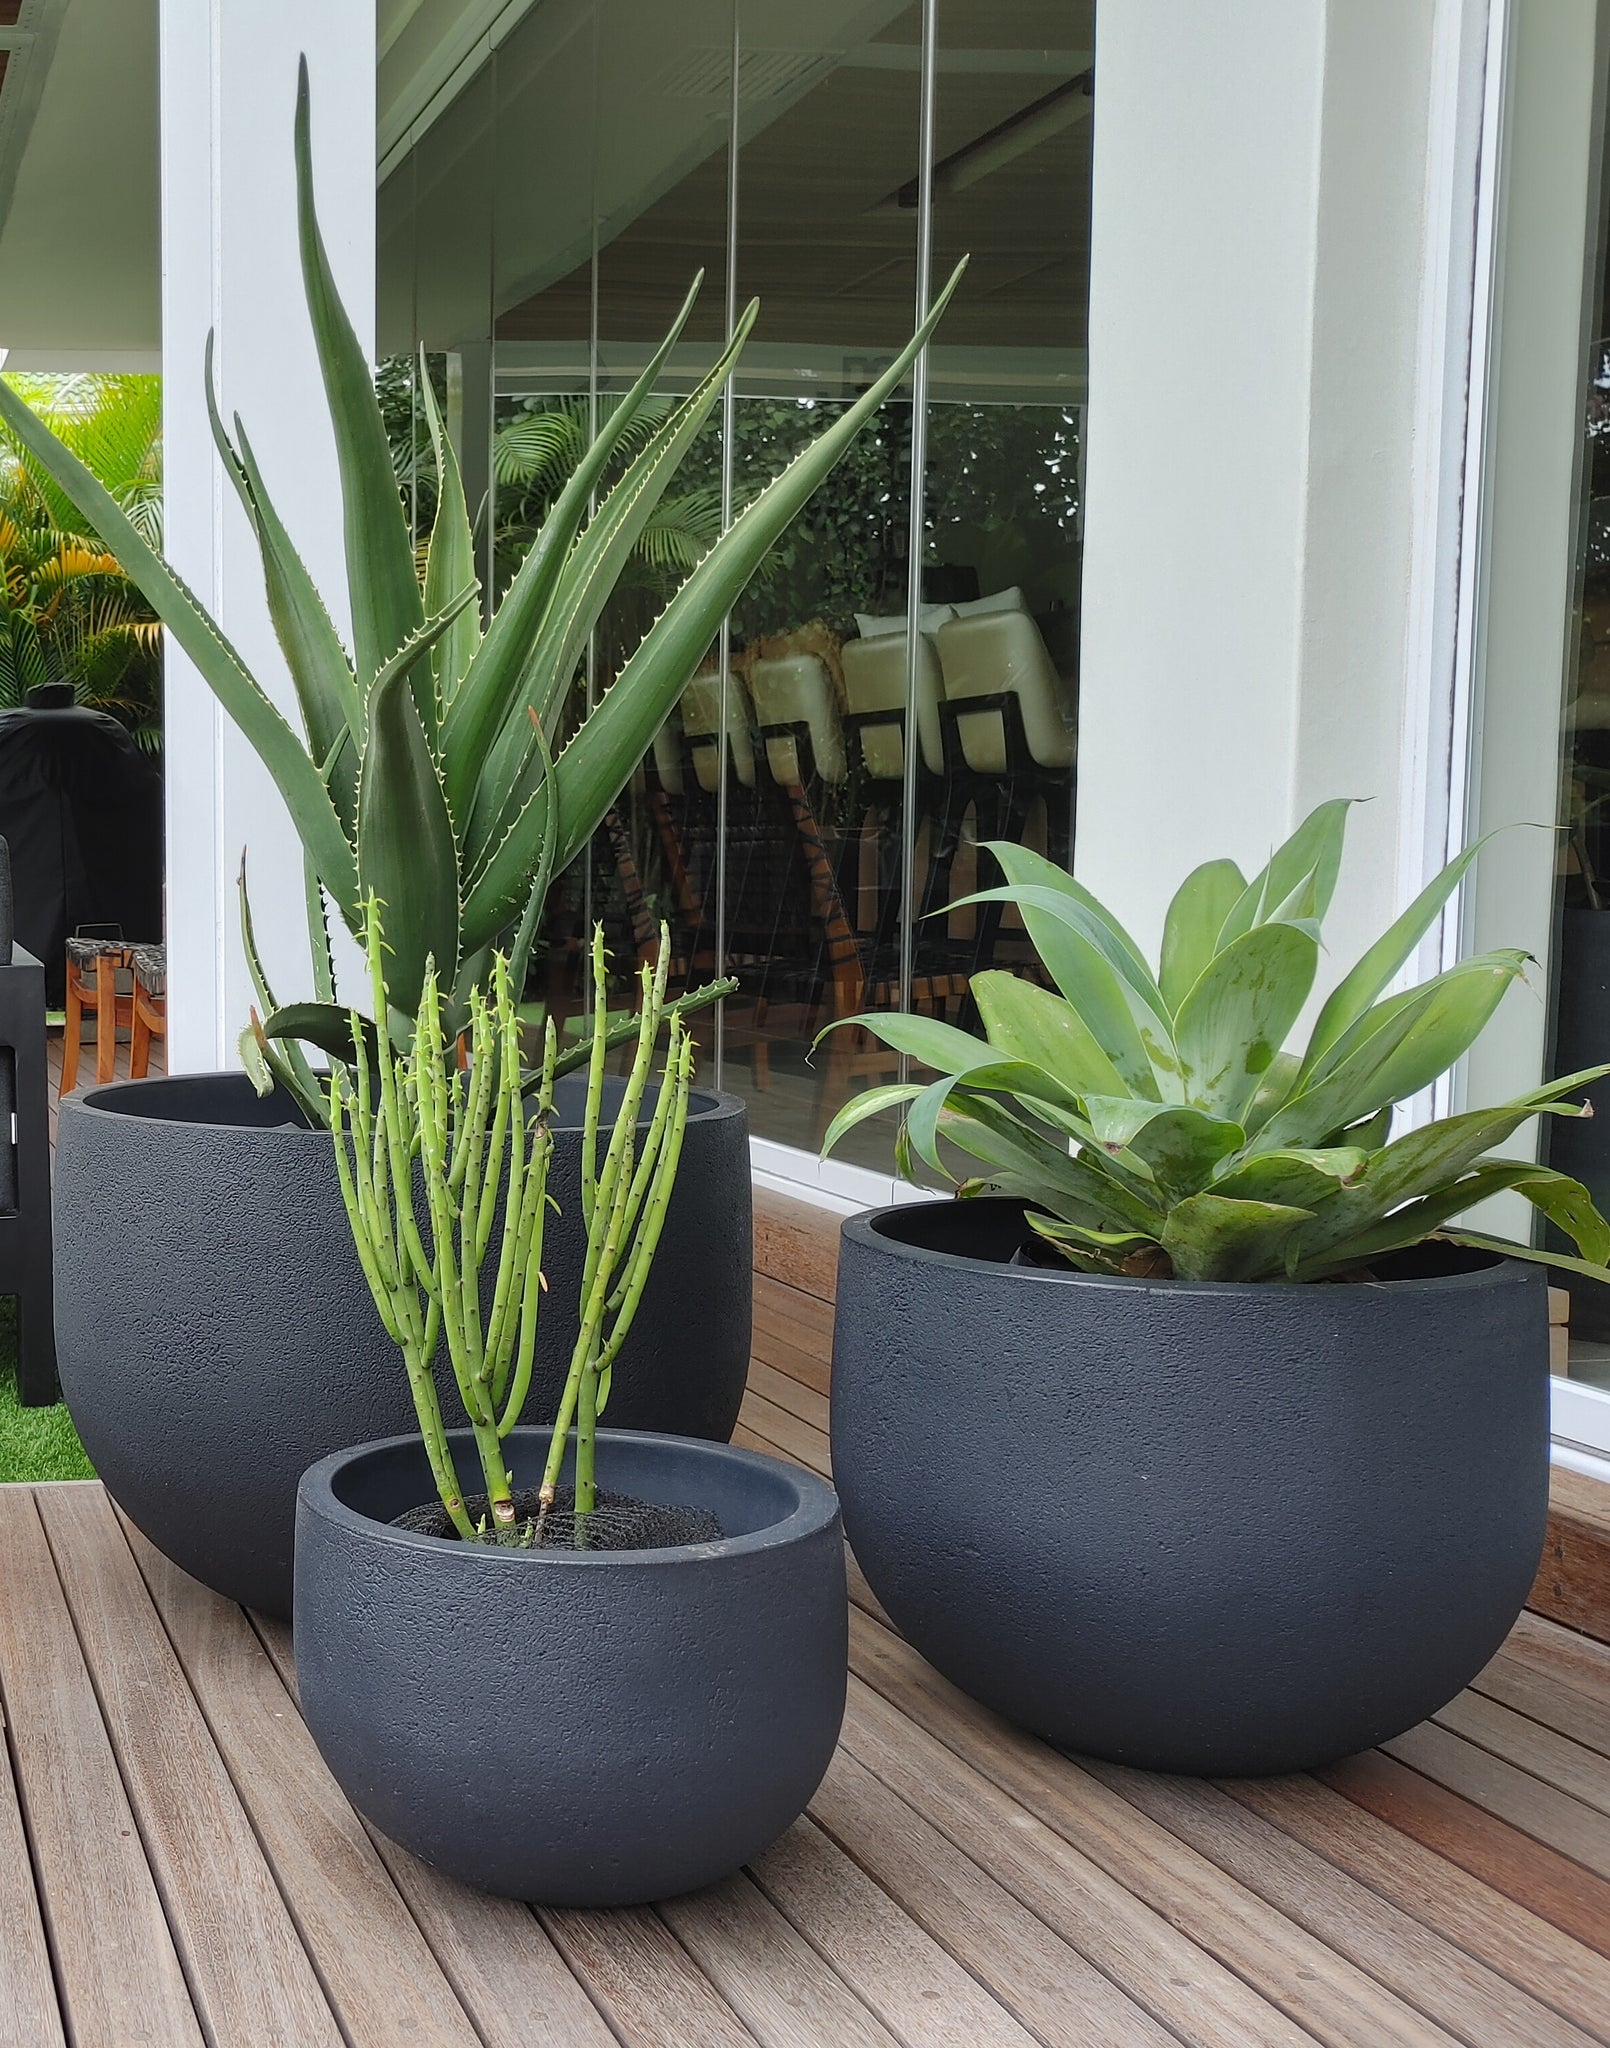 Clean lines but lower than the Rustic cask planters. Striaght sides with a rounded base, these low round planters are available in lead black , off white and sandstone.